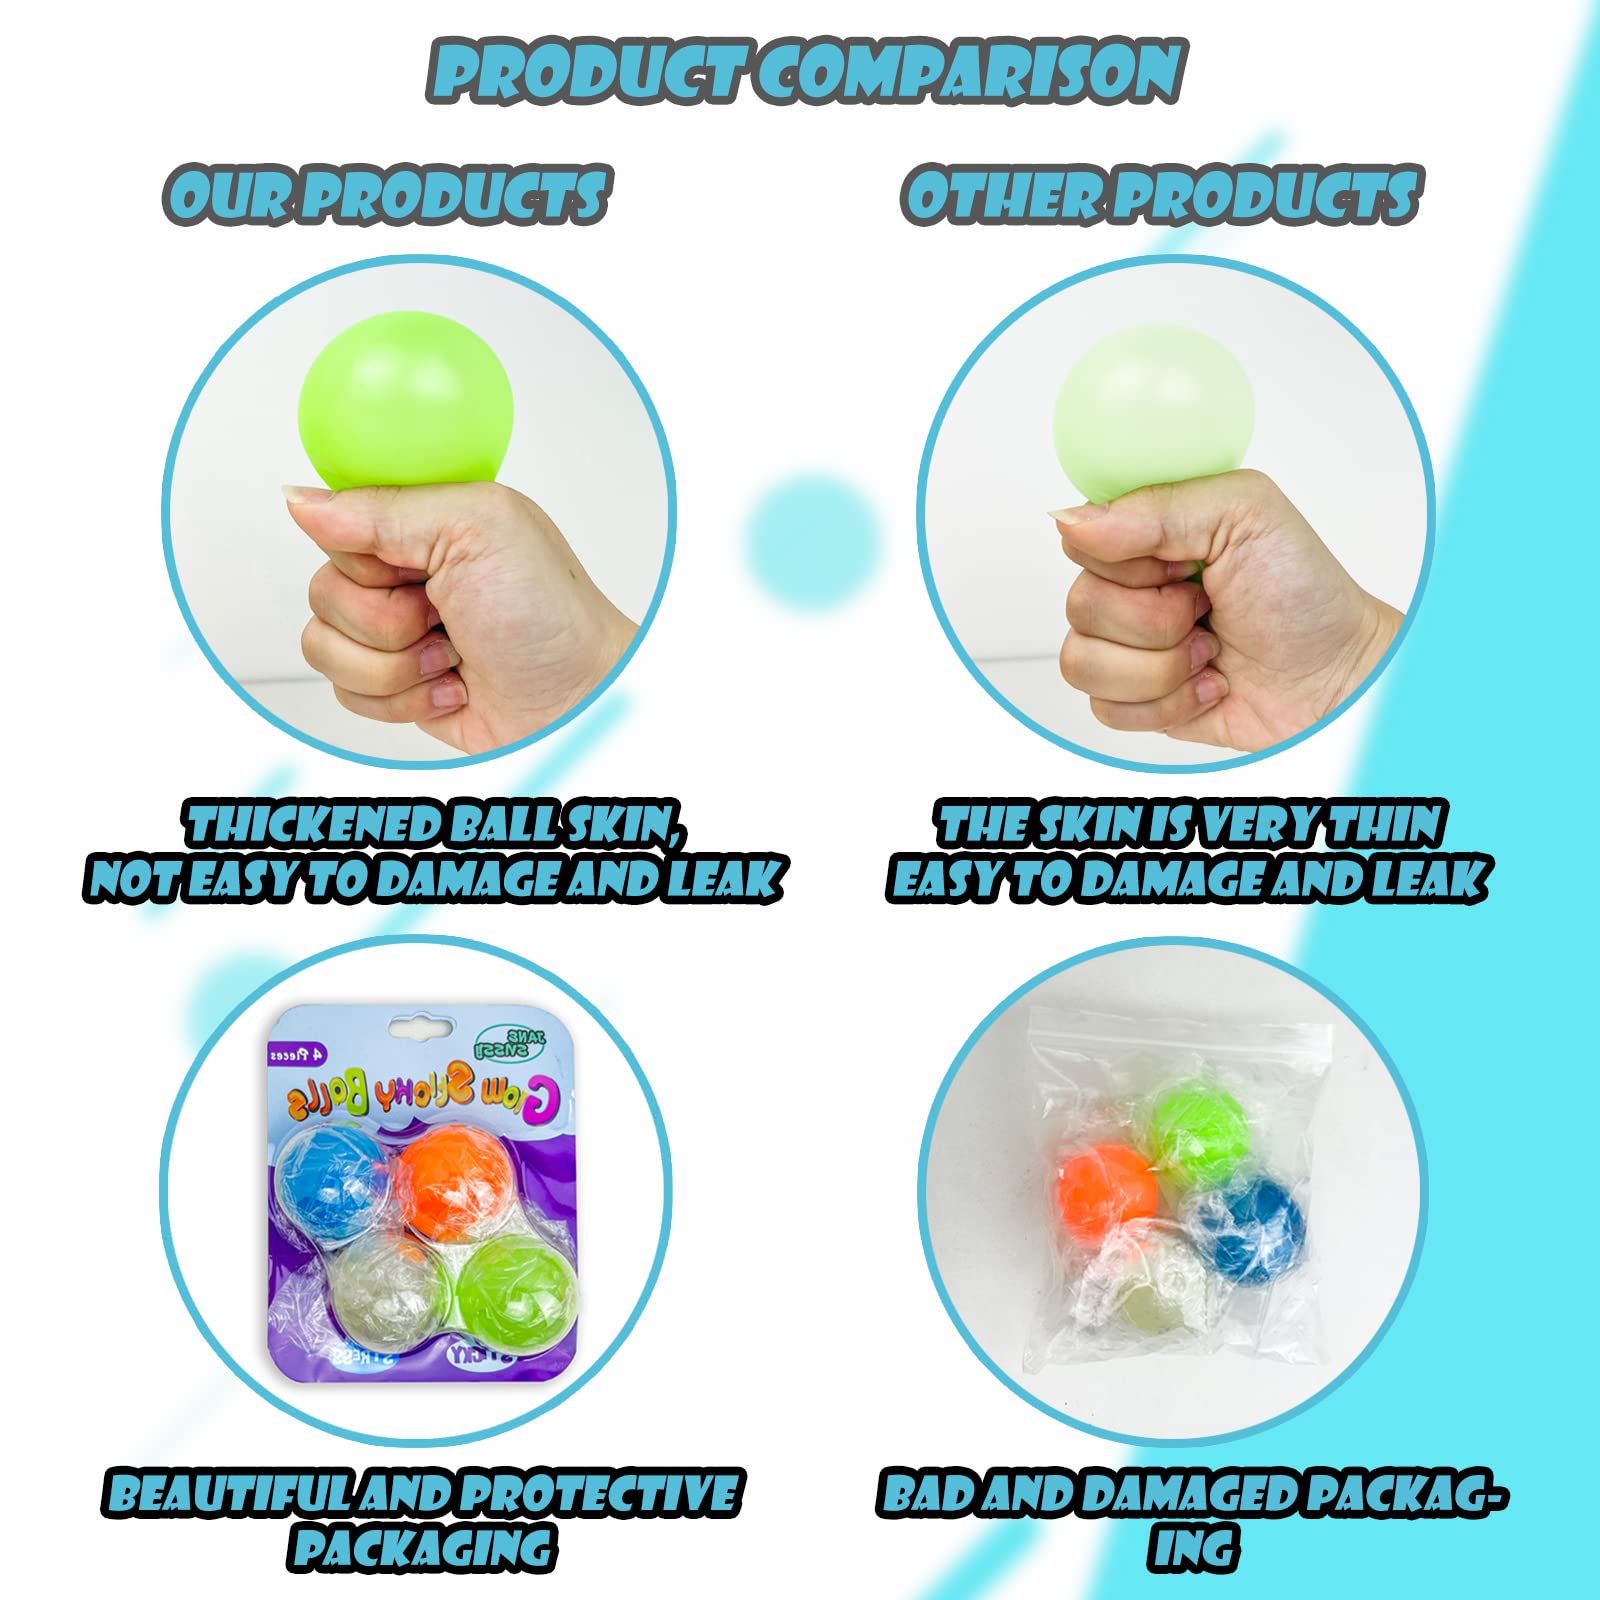 Glow in the Dark Sticky Balls that Stick to the Ceiling,Stress Balls for Kids and Adults,Glow Sticky Ceiling Balls,Squishy Toys for Kids,Fidget Toys,Party Favors, Anxiety Relief Items,ASMR Stuff(4Pcs)